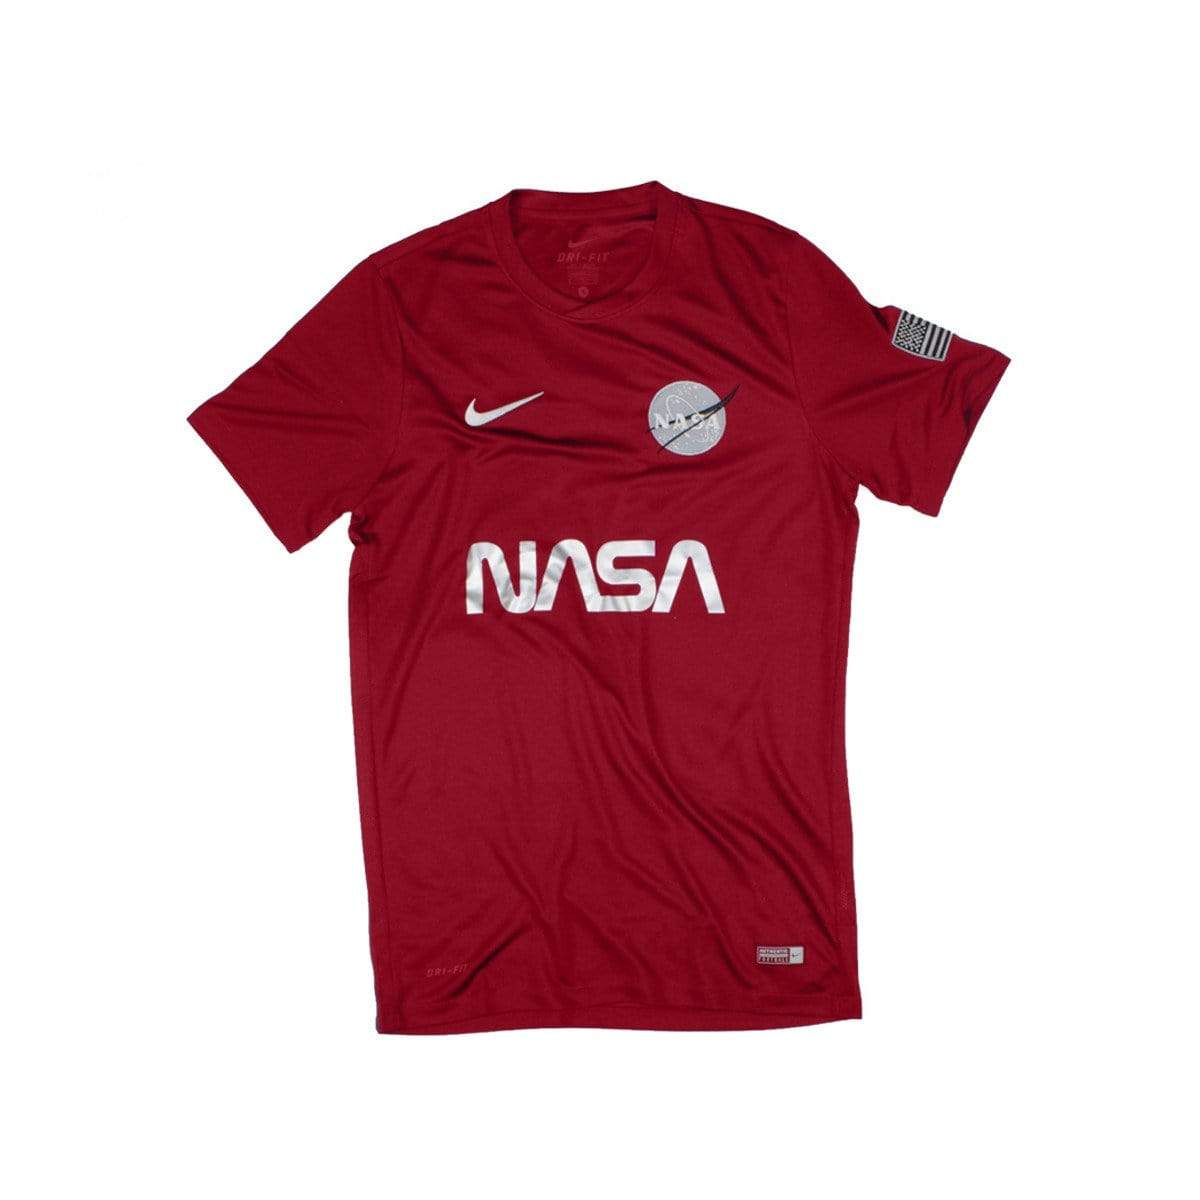 TheConceptClub Nasa Red Planet Jersey (Red)